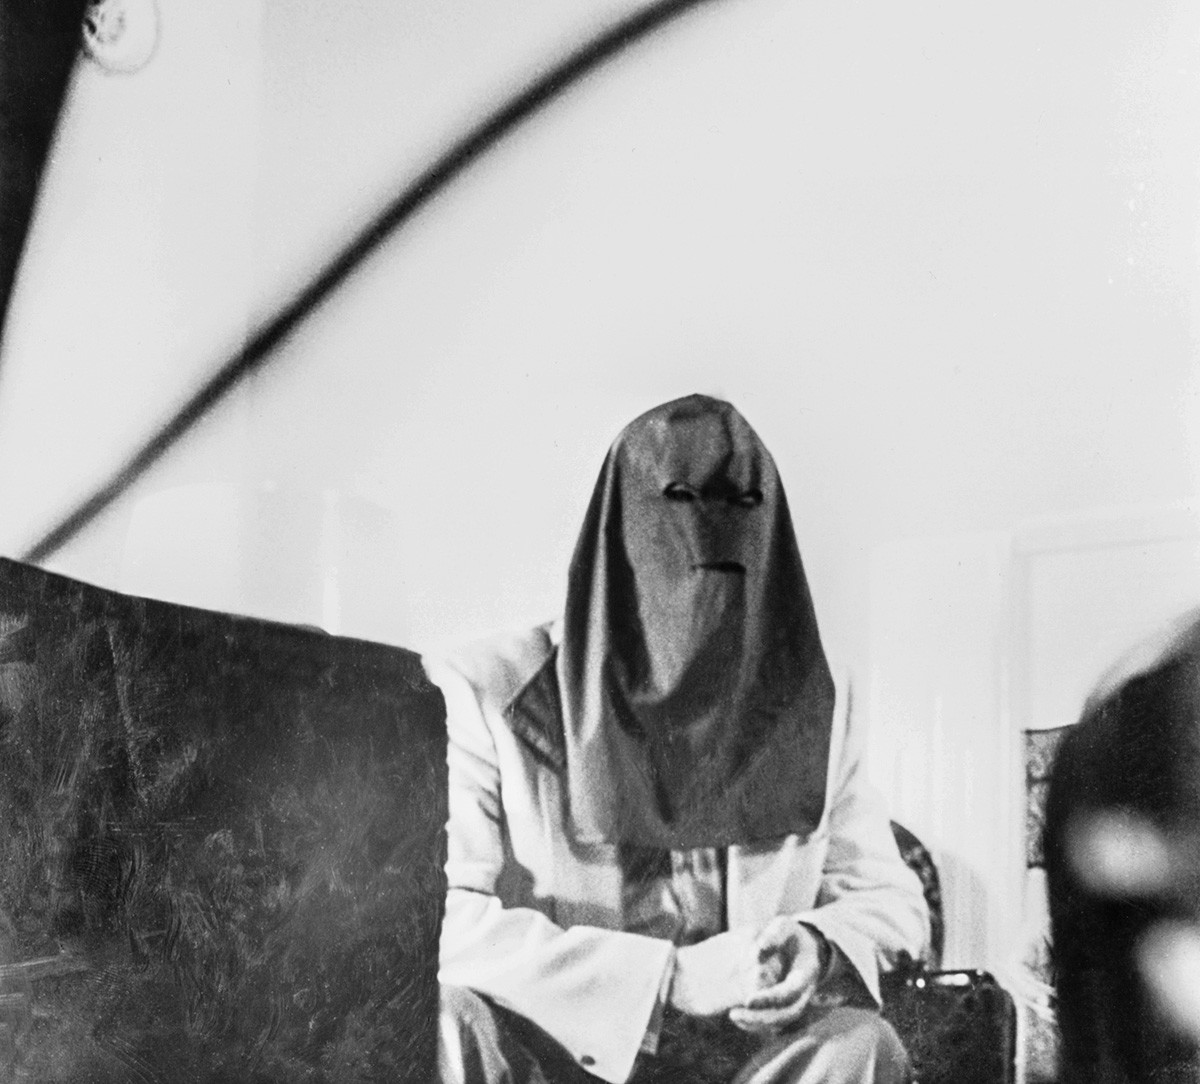 Igor Gouzenko, former decoding clerk in the Russian Embassy in Toronto who exposed a Red spy ring operation in Canada, is shown in the first photo ever permitted of him since he became a marked man...He is wearing a specifically designed hood to foil future identification.